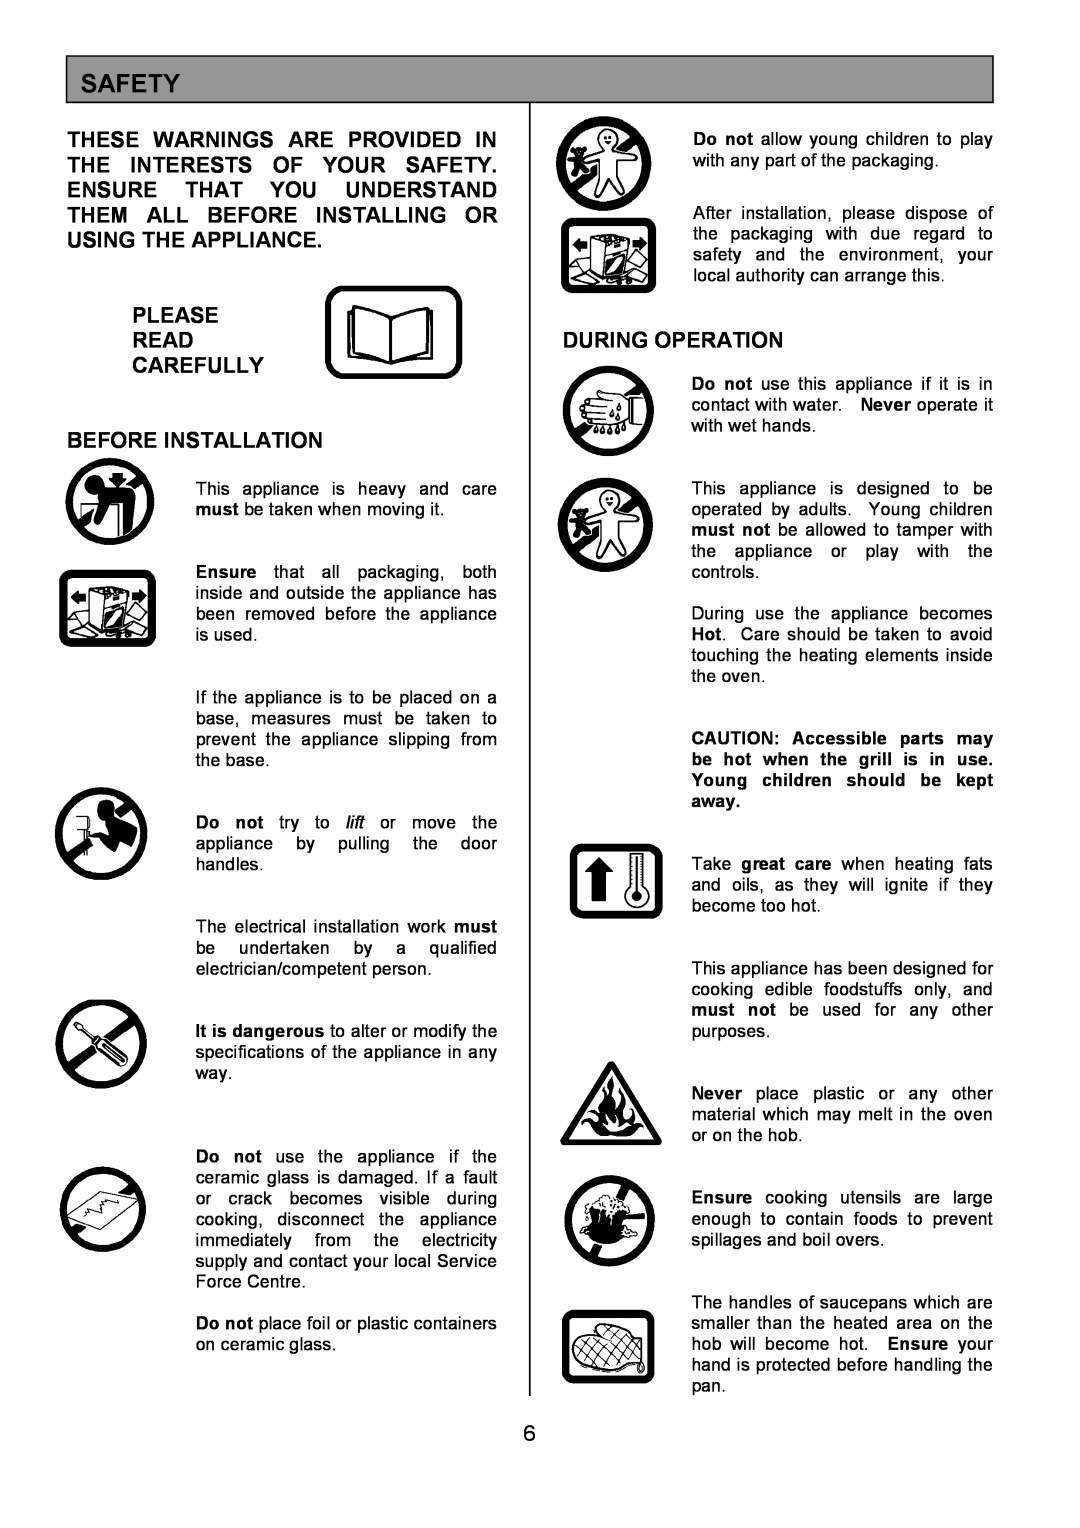 Tricity Bendix SIE556 installation instructions Safety, Please Read Carefully Before Installation, During Operation 